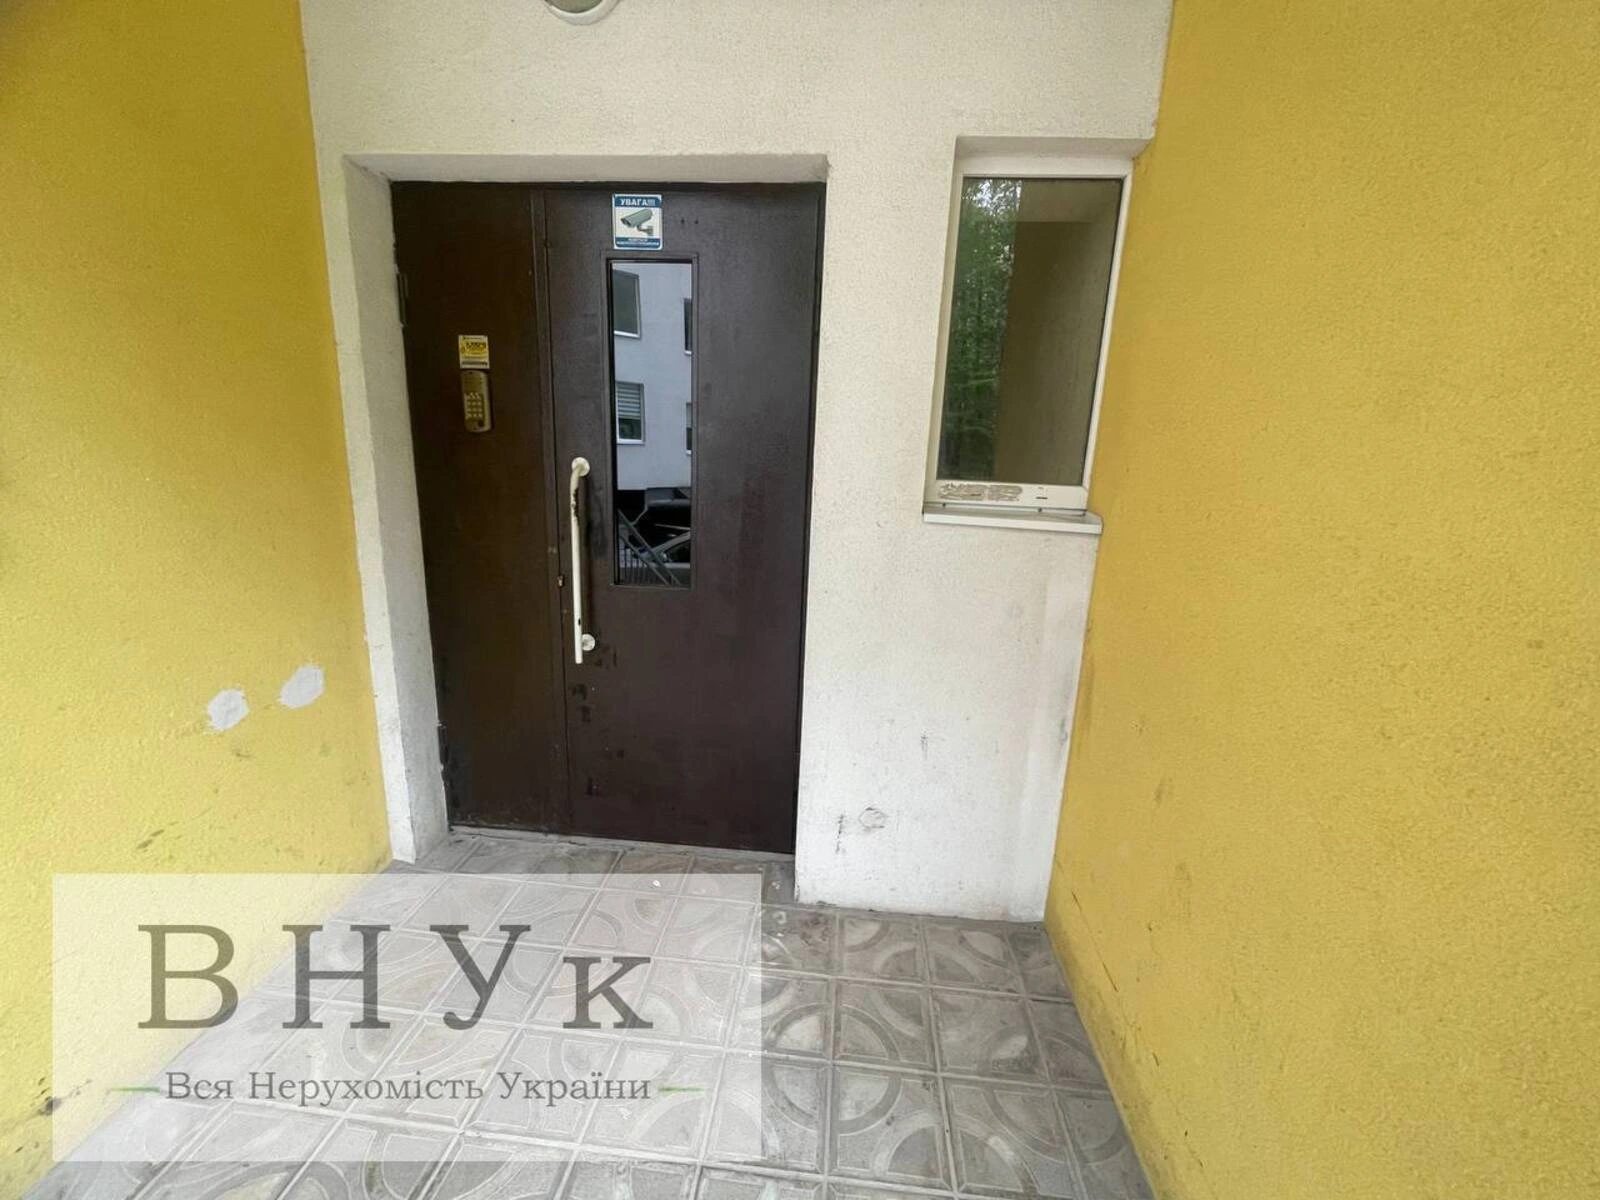 Apartments for sale. 2 rooms, 73 m², 3rd floor/10 floors. Budnoho S. , Ternopil. 